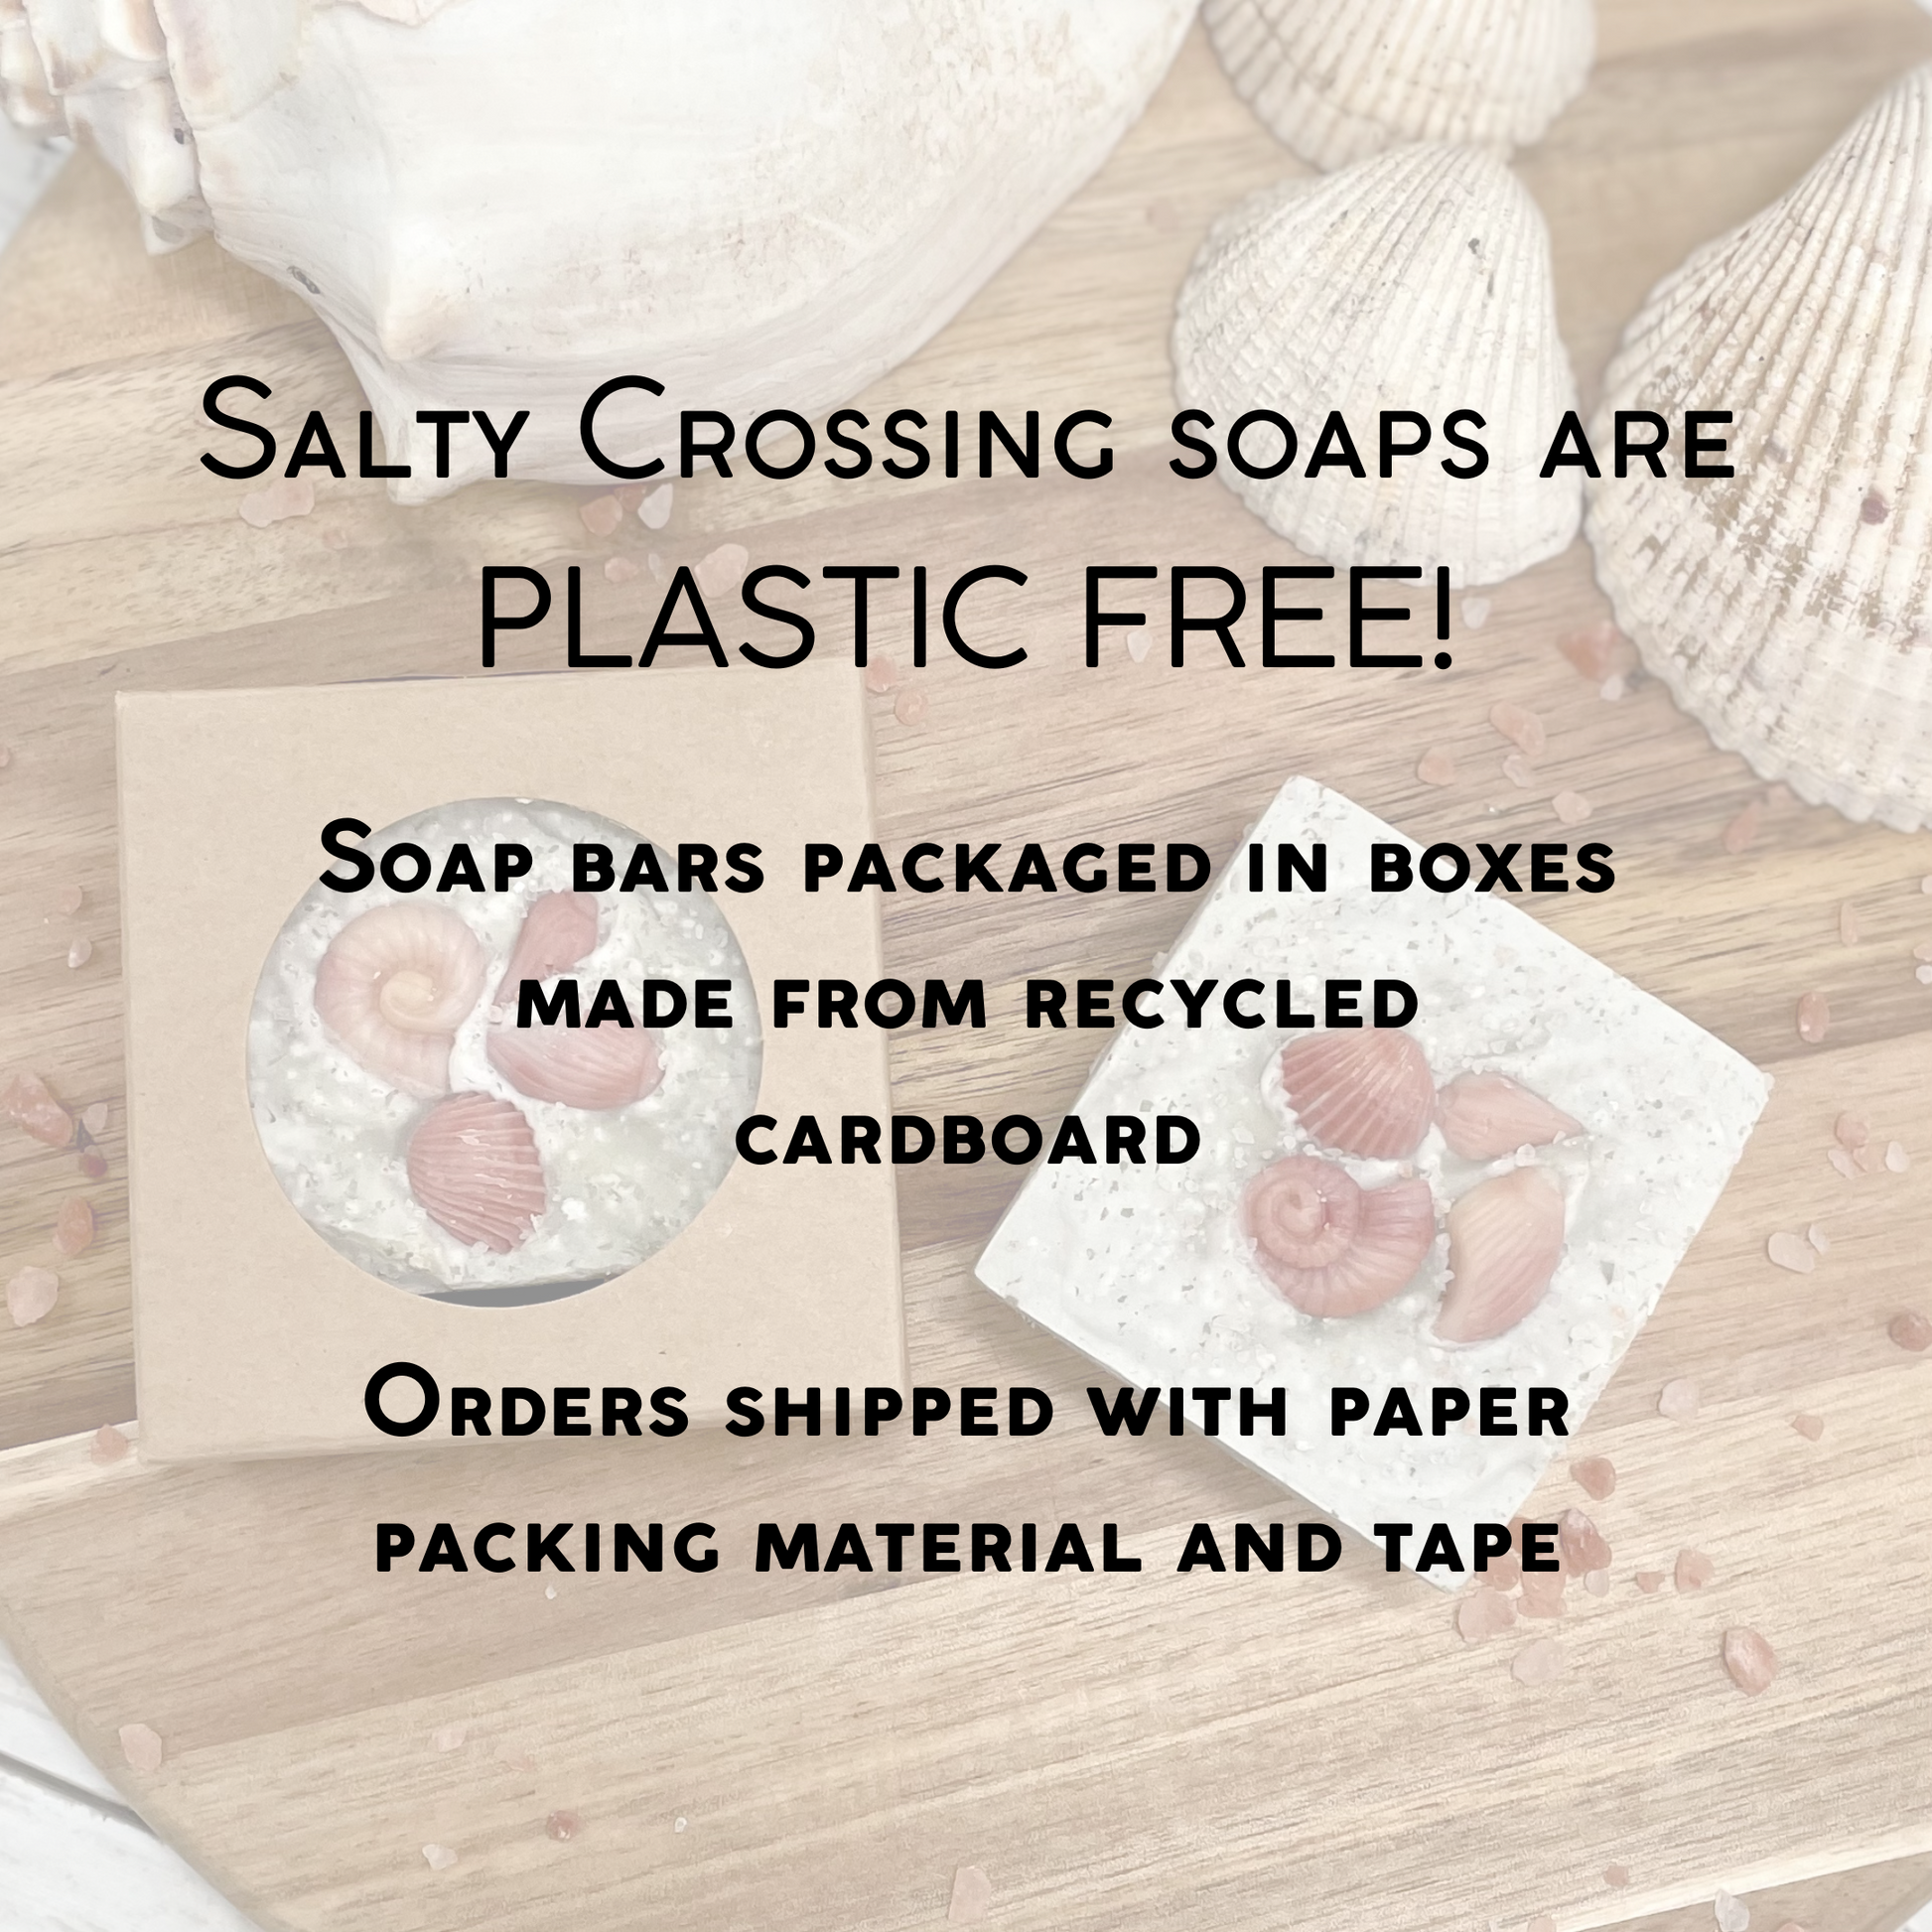 graphic. salty crossing soaps are plastic free. soap bars packaged in boxes made from recycled cardboard. orders shipped with paper packing material and tape